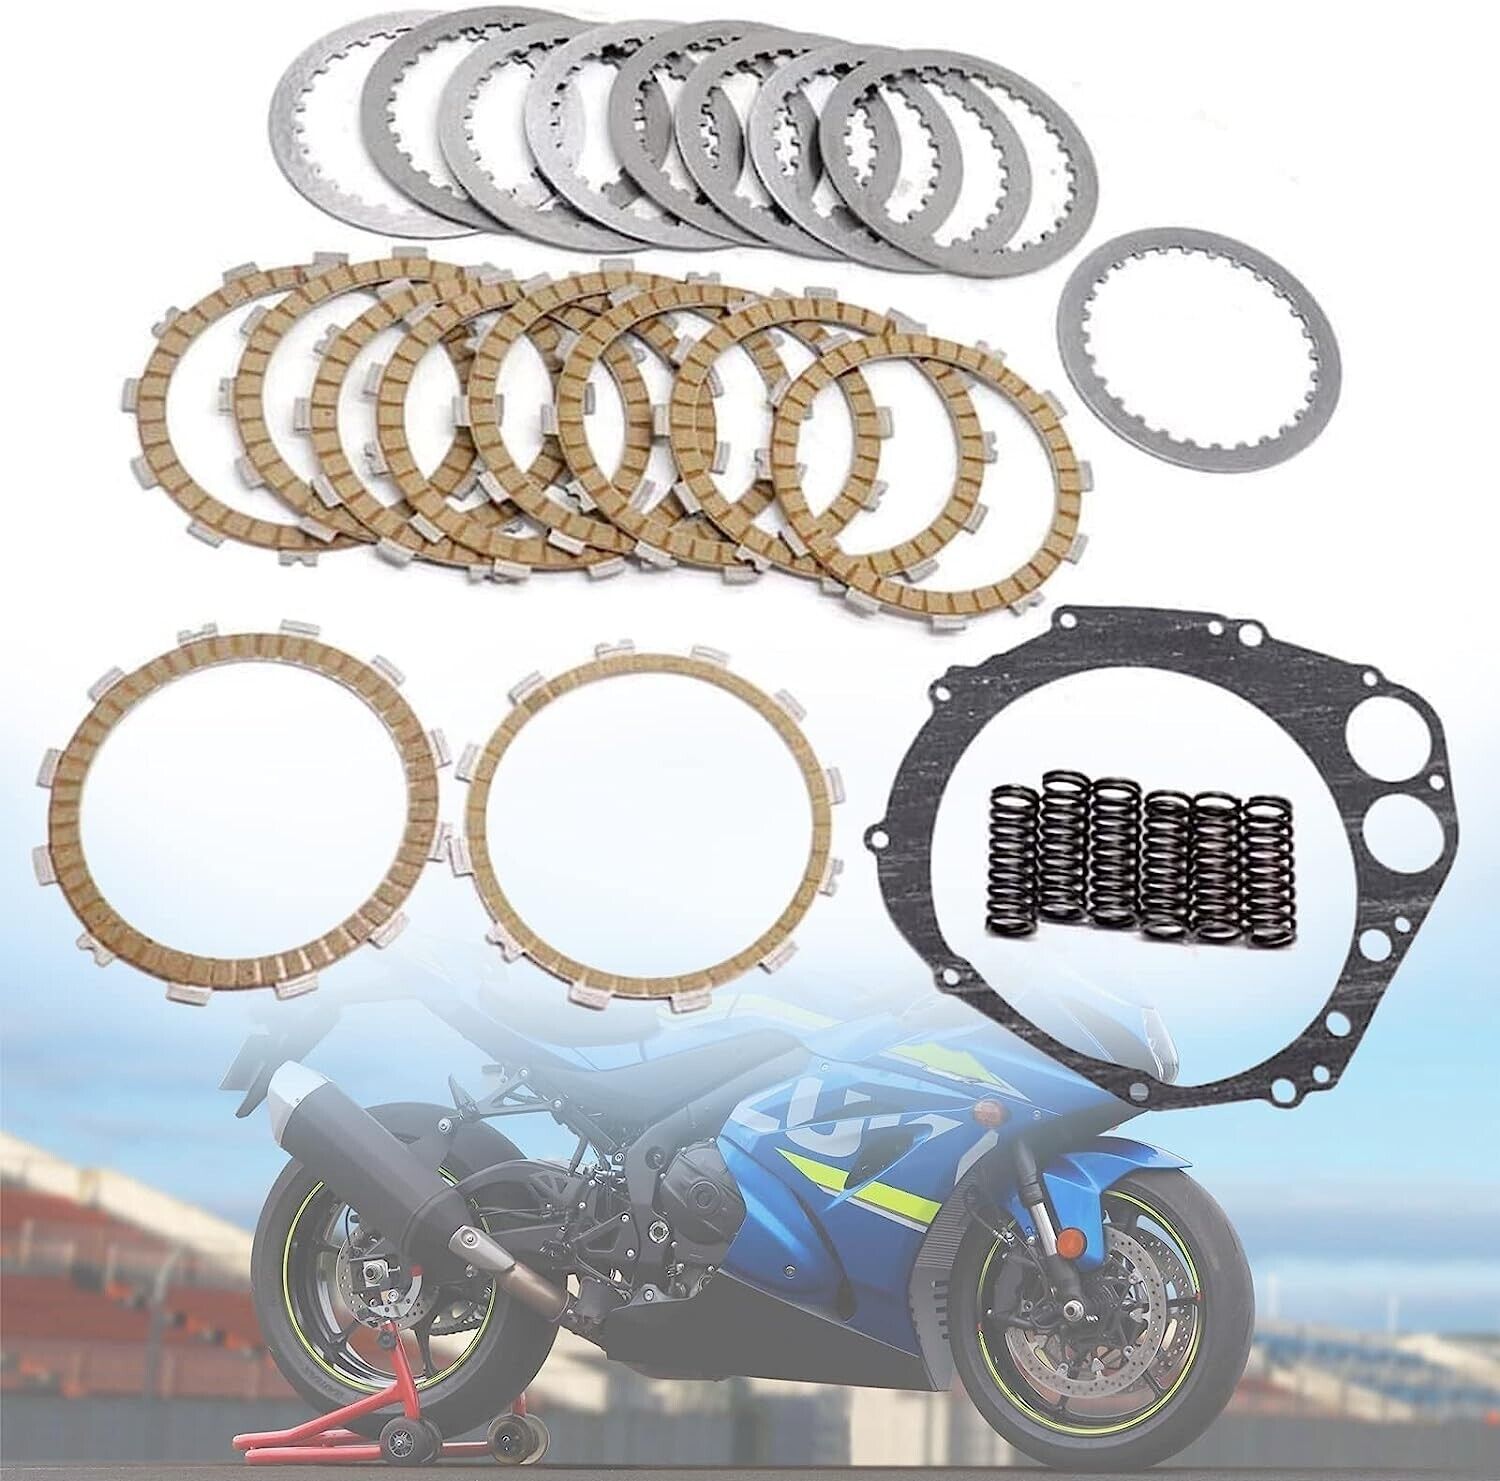 Clutch Kit Heavy Duty Springs and Cover Gasket Fit For Suzuki GSXR1000 2007-2008